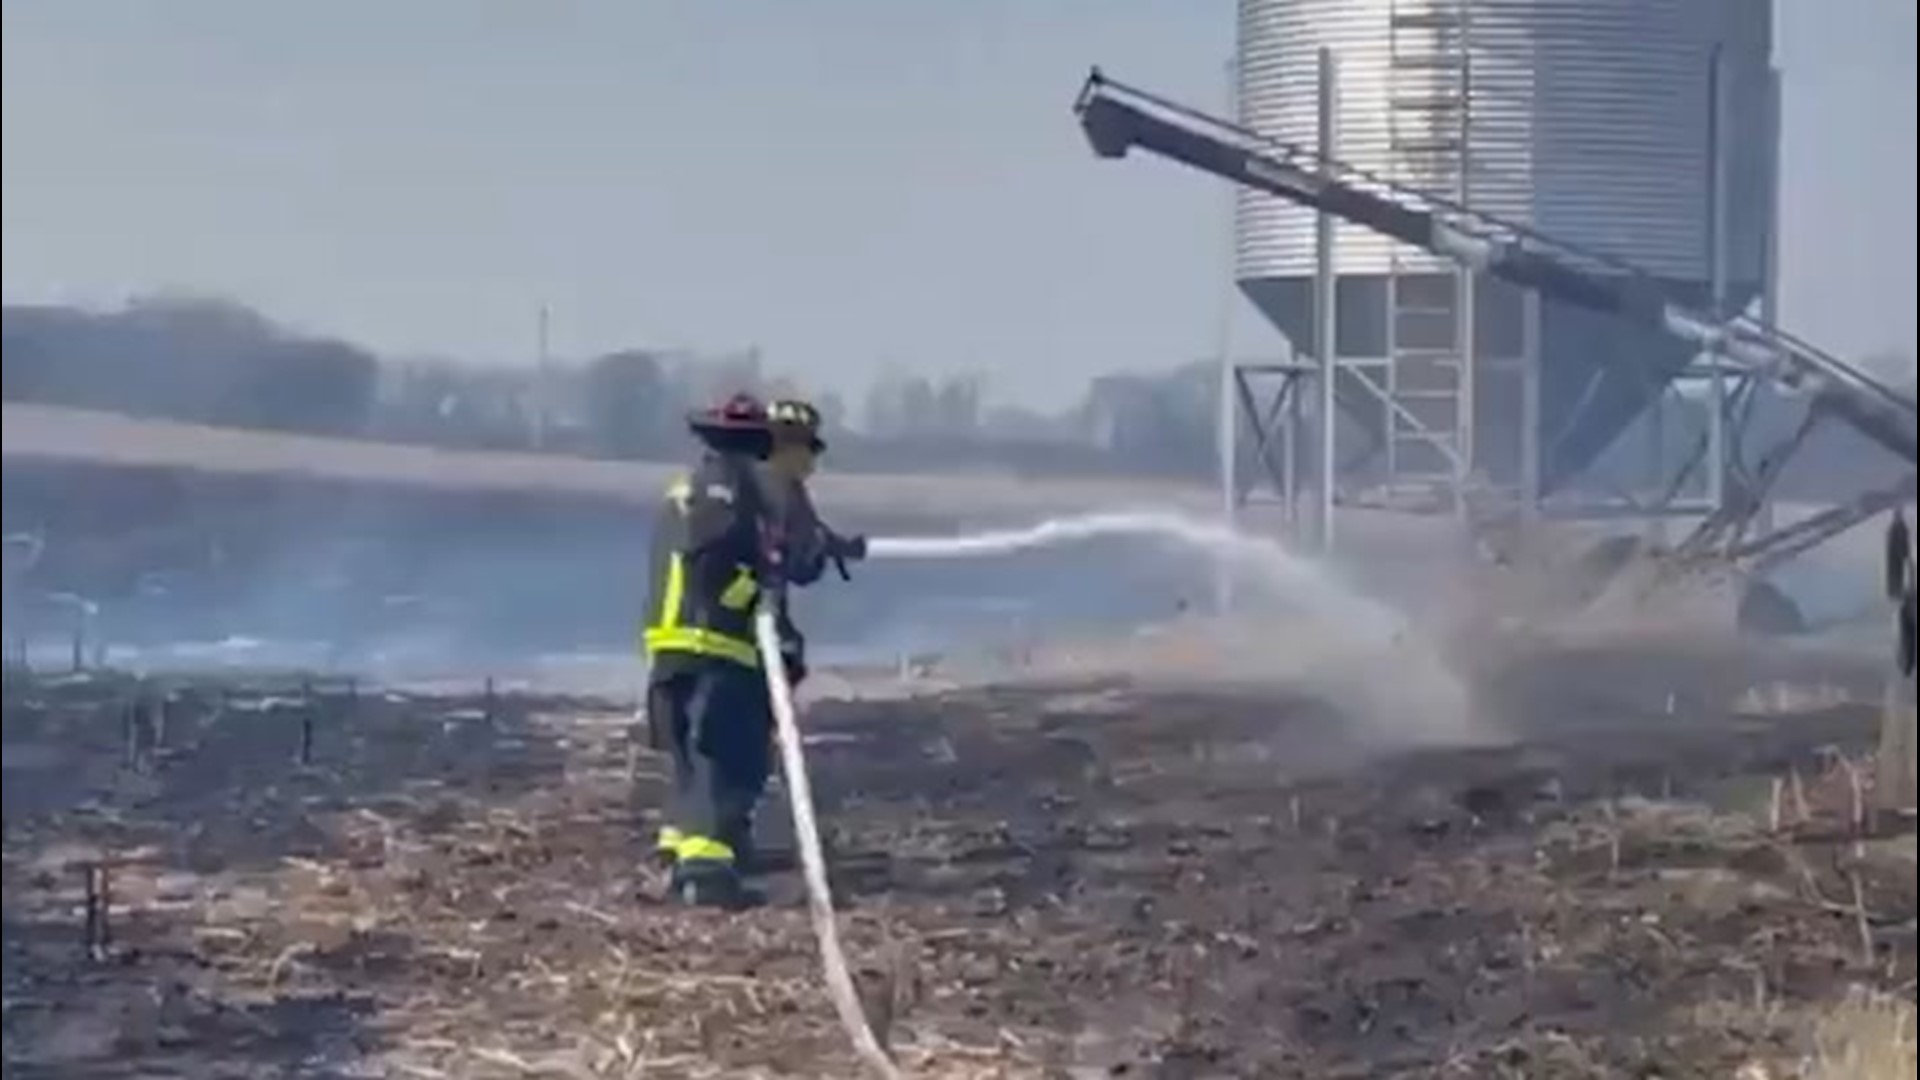 The Bargersville Fire and Whiteland Fire departments teamed up to battle a grass fire burning under low humid and windy conditions on March 8 in Indiana.